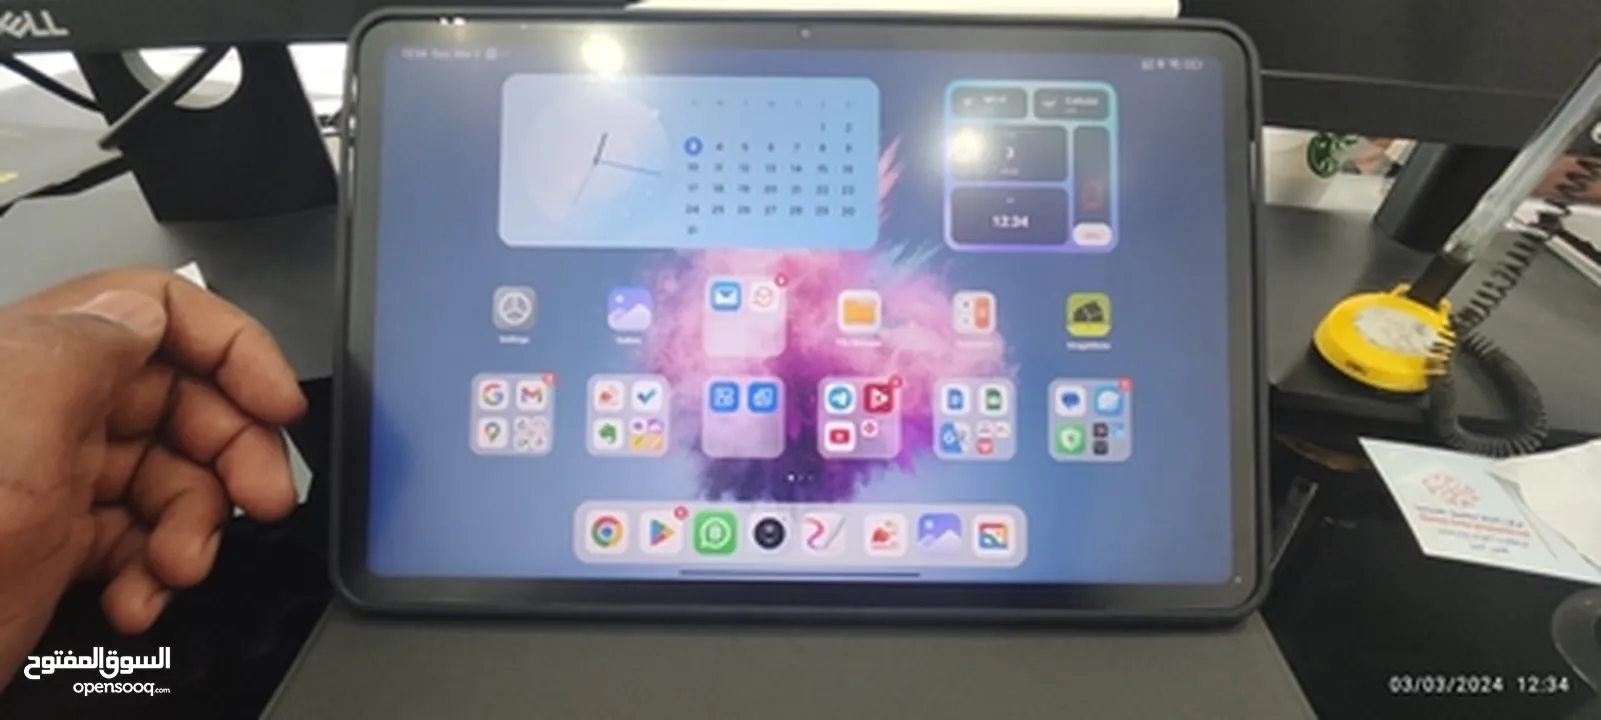 Xiaomi Pad 6 With Smart Pen And Keyboard ,-  3 Months Old